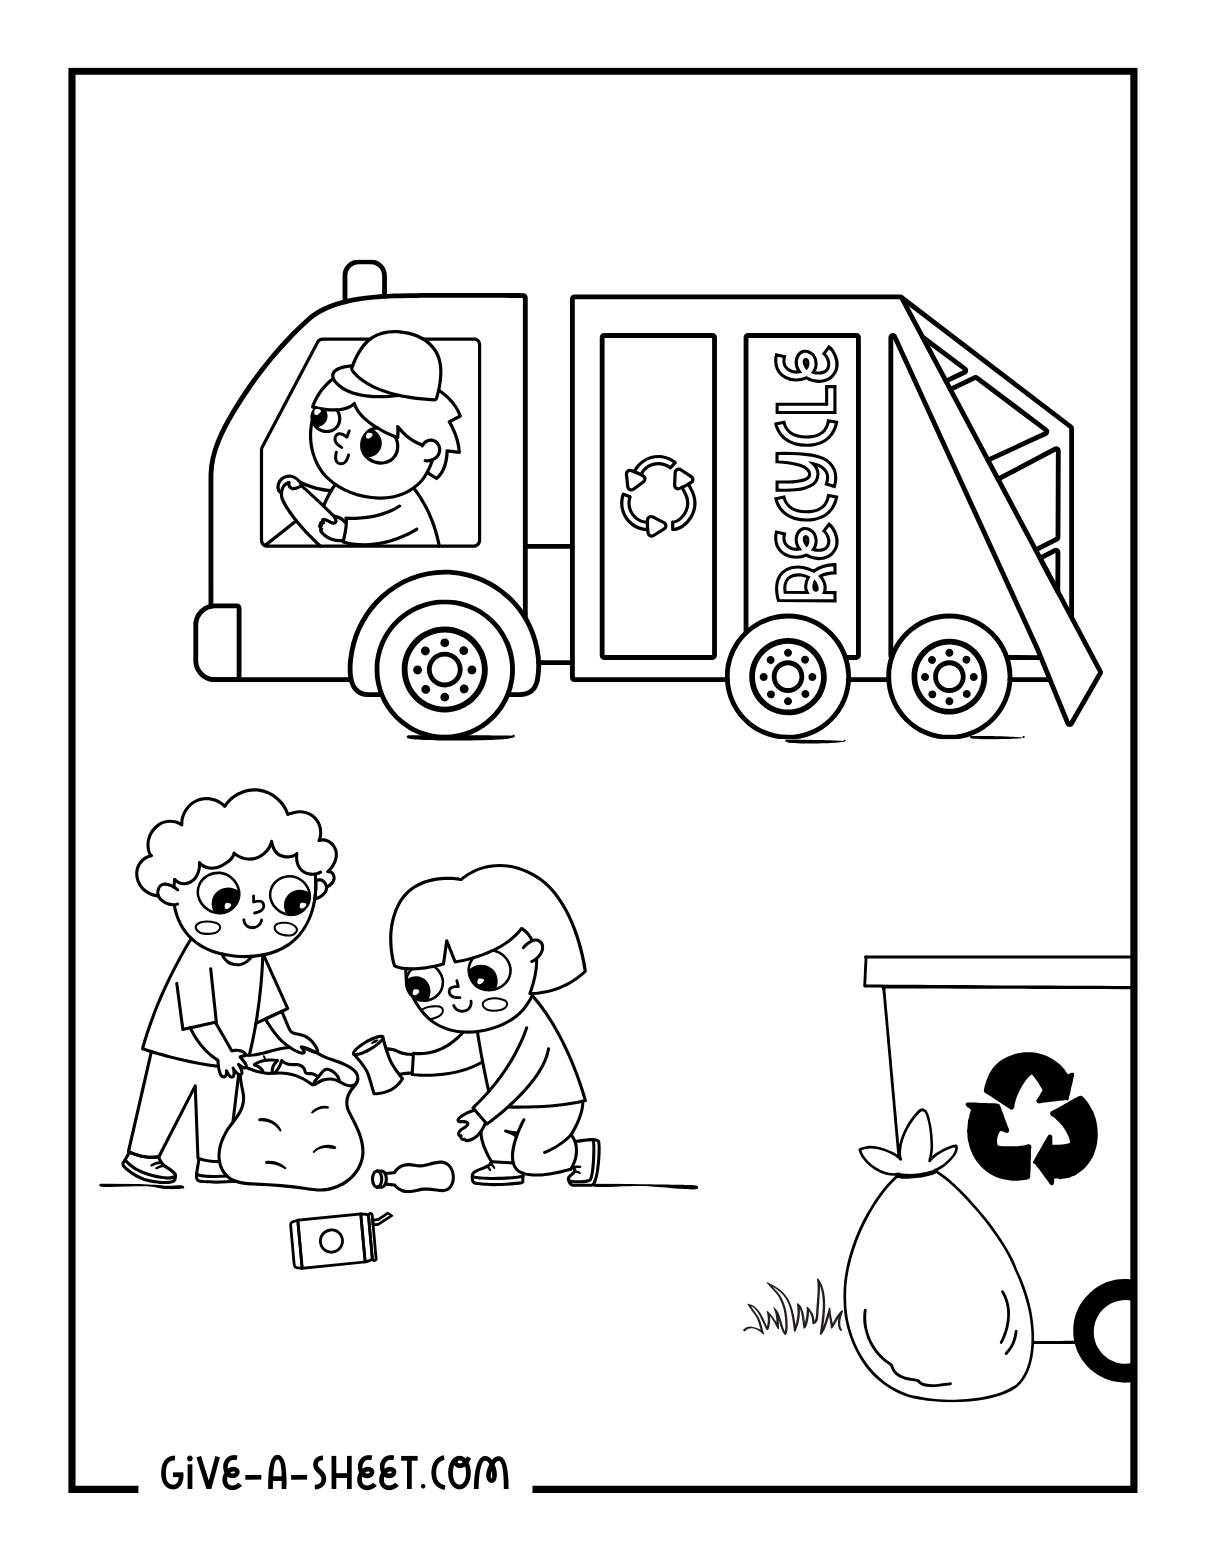 Truck coloring sheet for recycling kids.